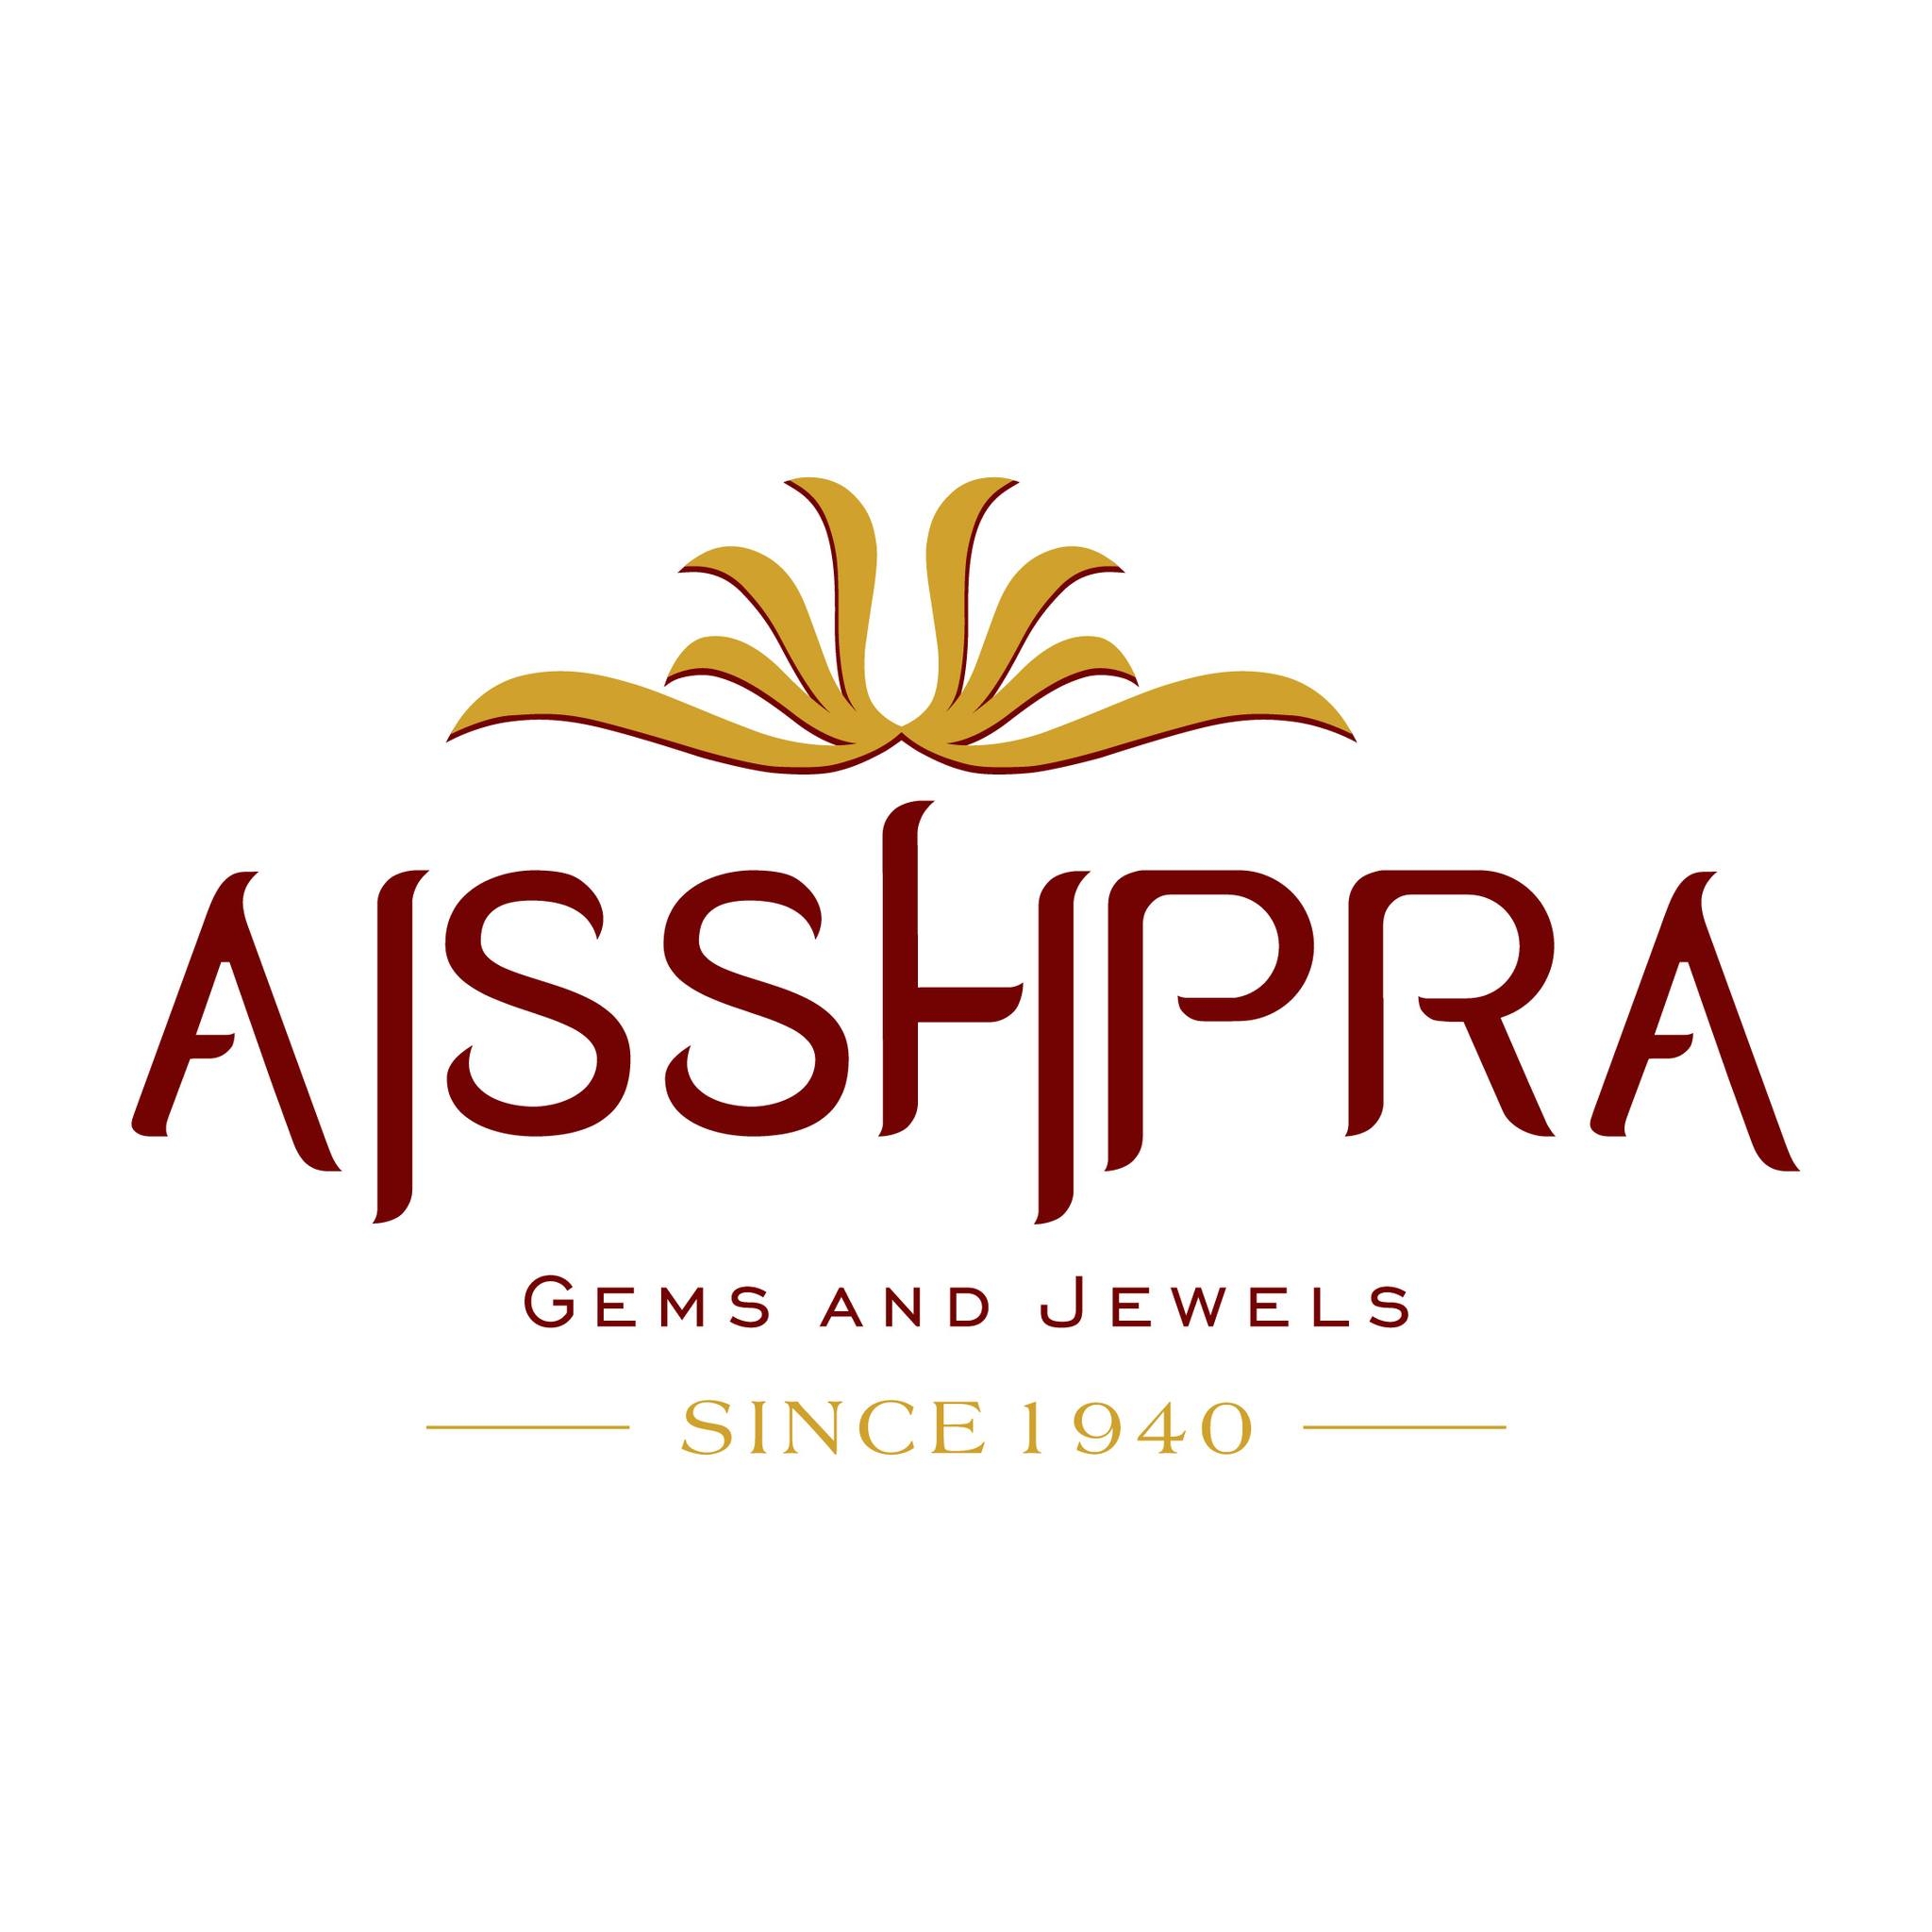 Aisshpra Gems and Jewels launches its much awaited store in the holy city of Lord Shri Ram, Ayodhya